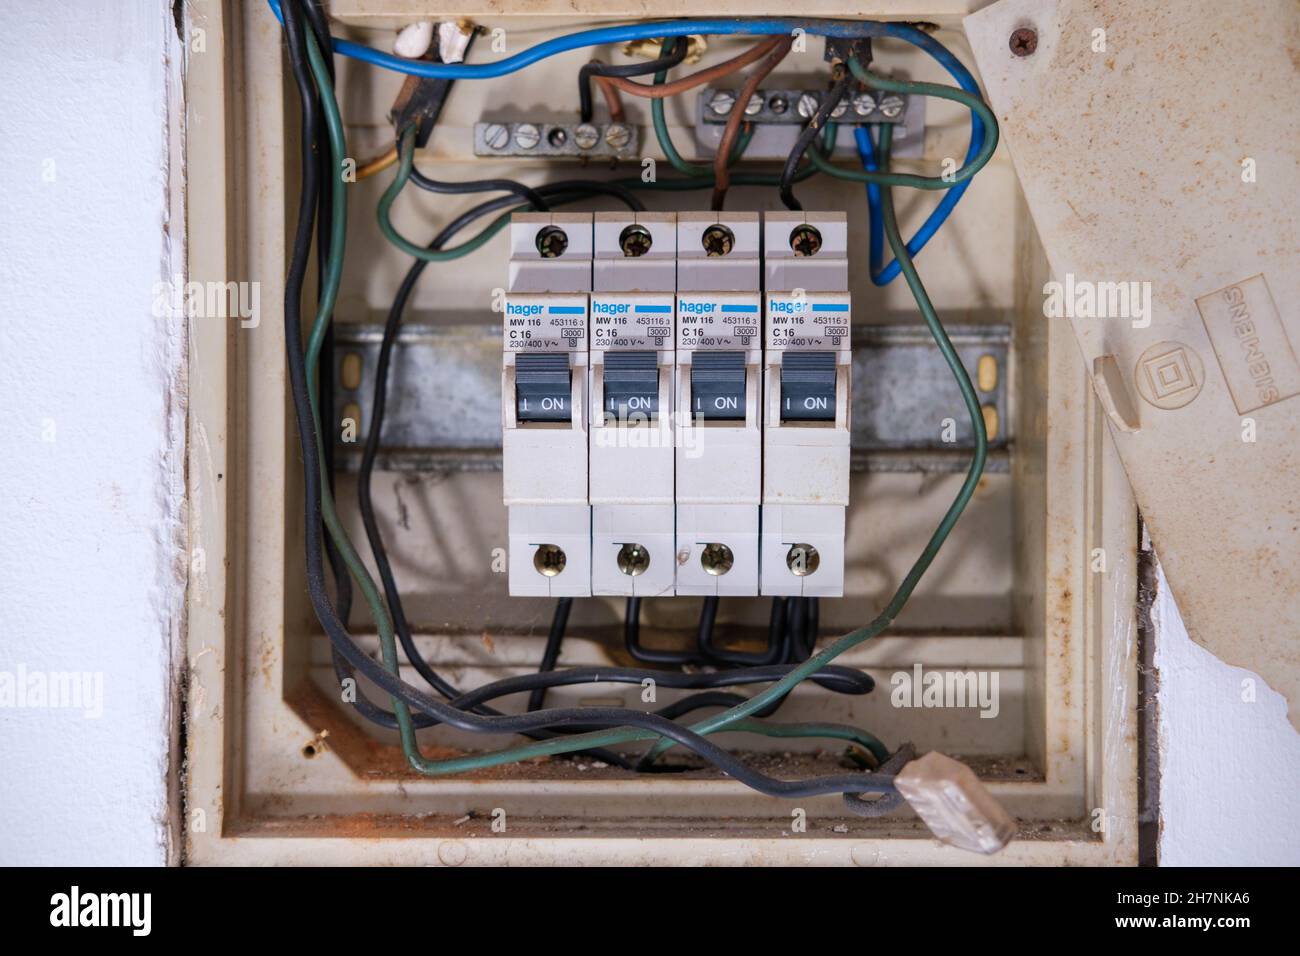 Castelo Branco, Portugal - November 16 2021: 4 Hager C16 Circuit breakers mounted dangerously in a fuse box Stock Photo